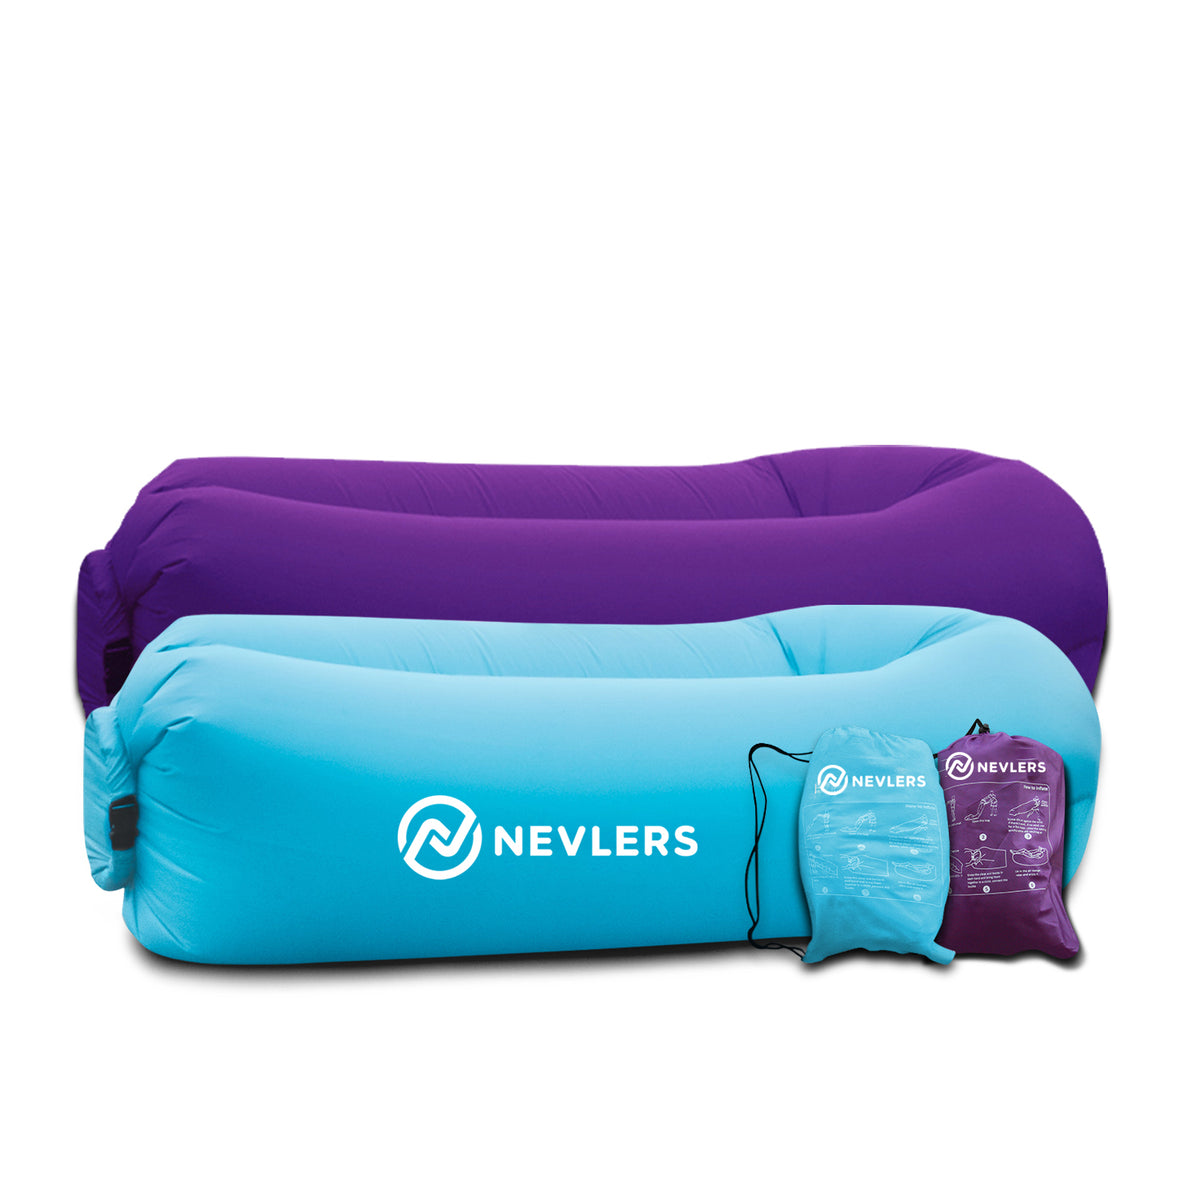 Inflatable Loungers - Blue/Purple - 2 Pack